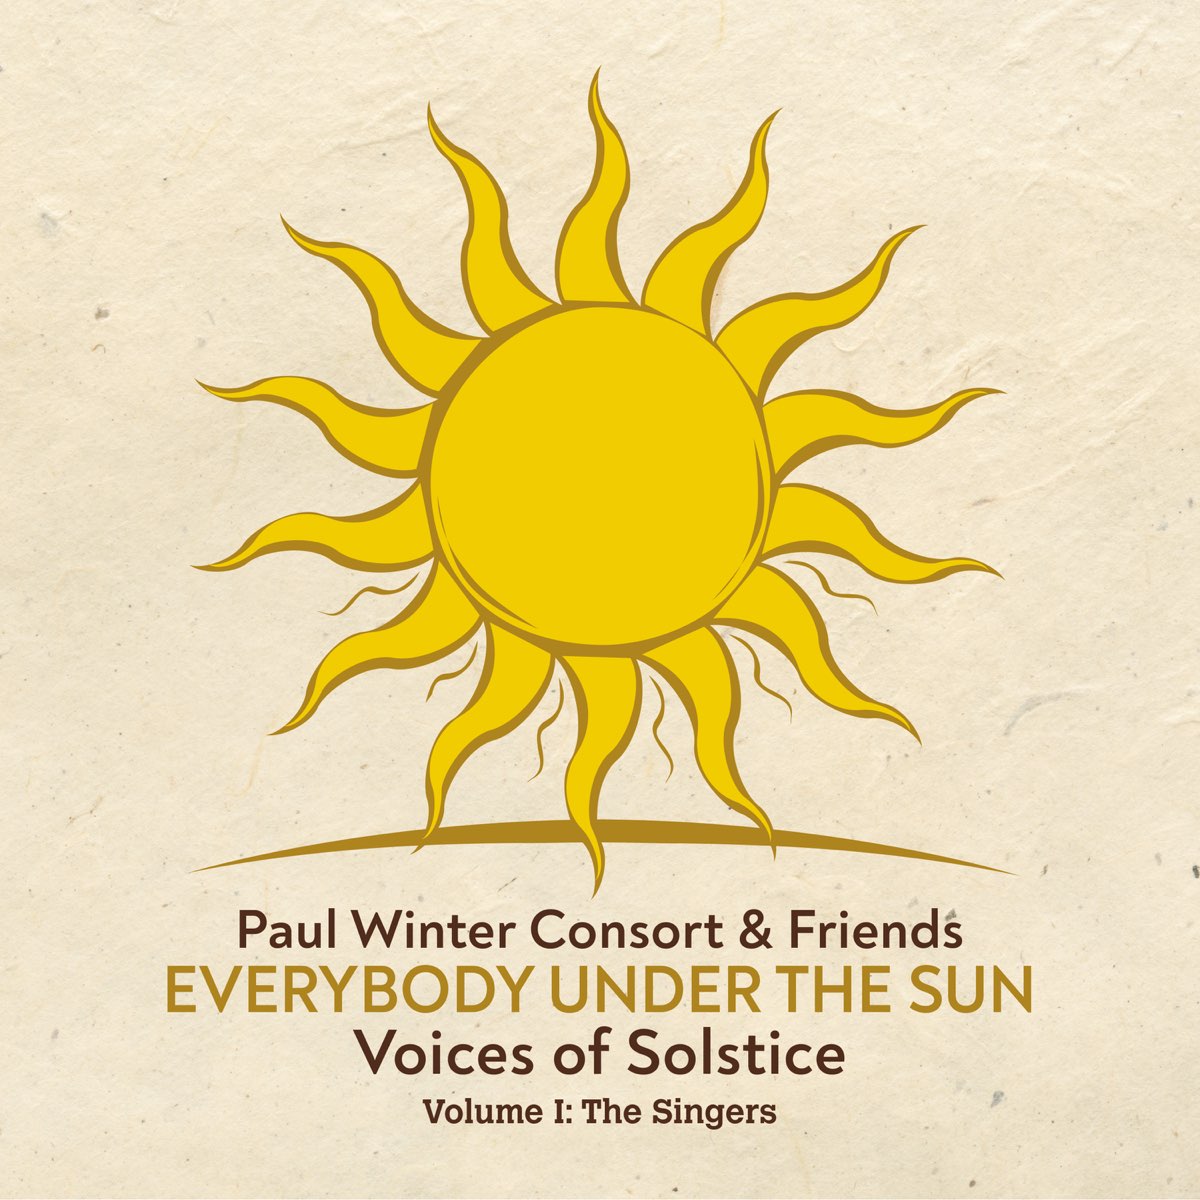 Song of the Solstice. Sun Voice. Sun voices